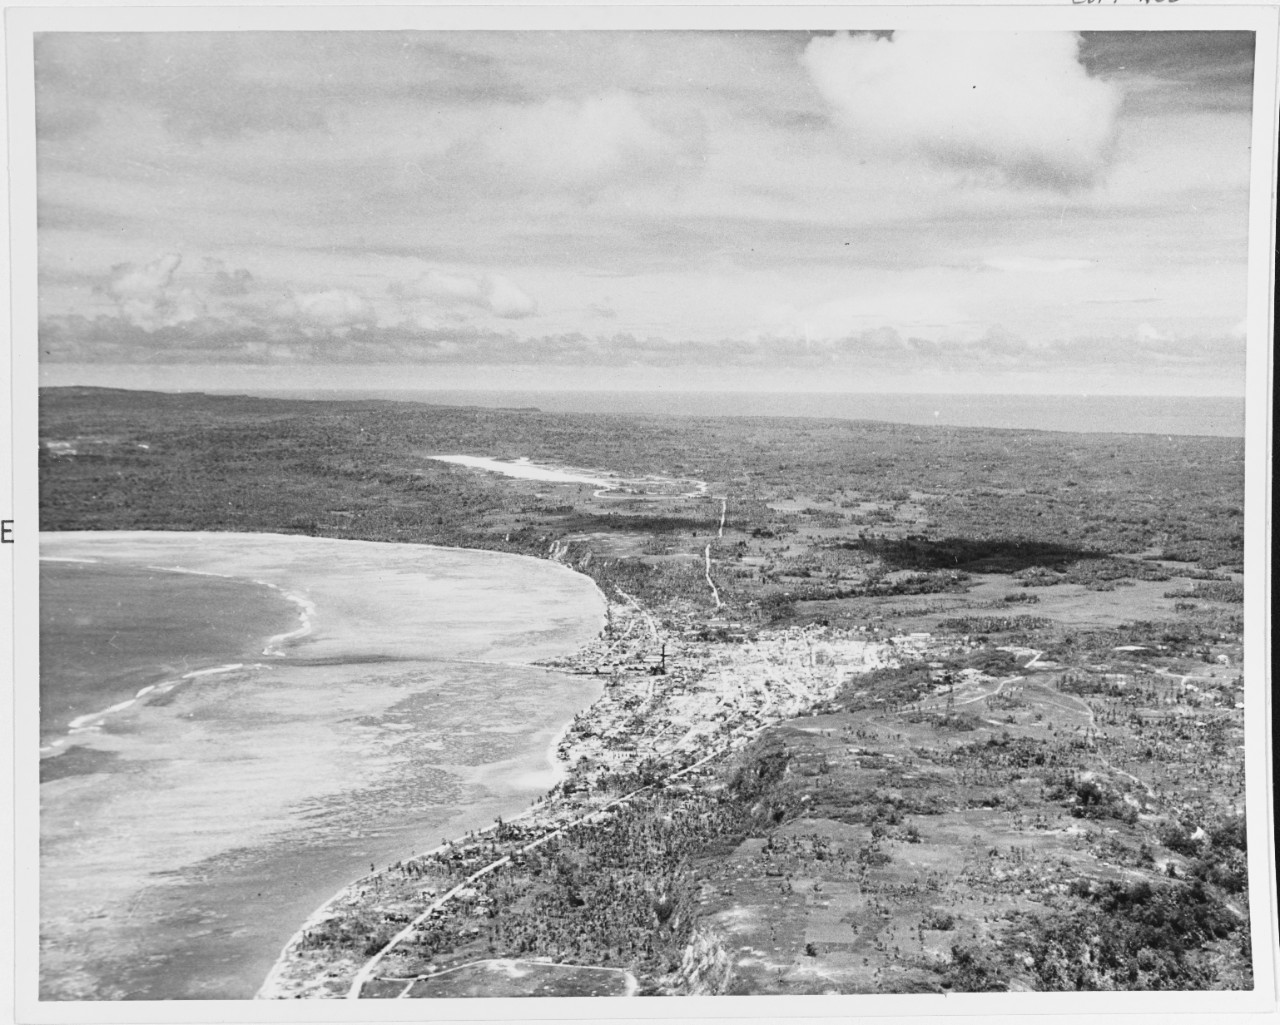 Agana, Guam after its capture by U.S. Forces, July-August, 1944